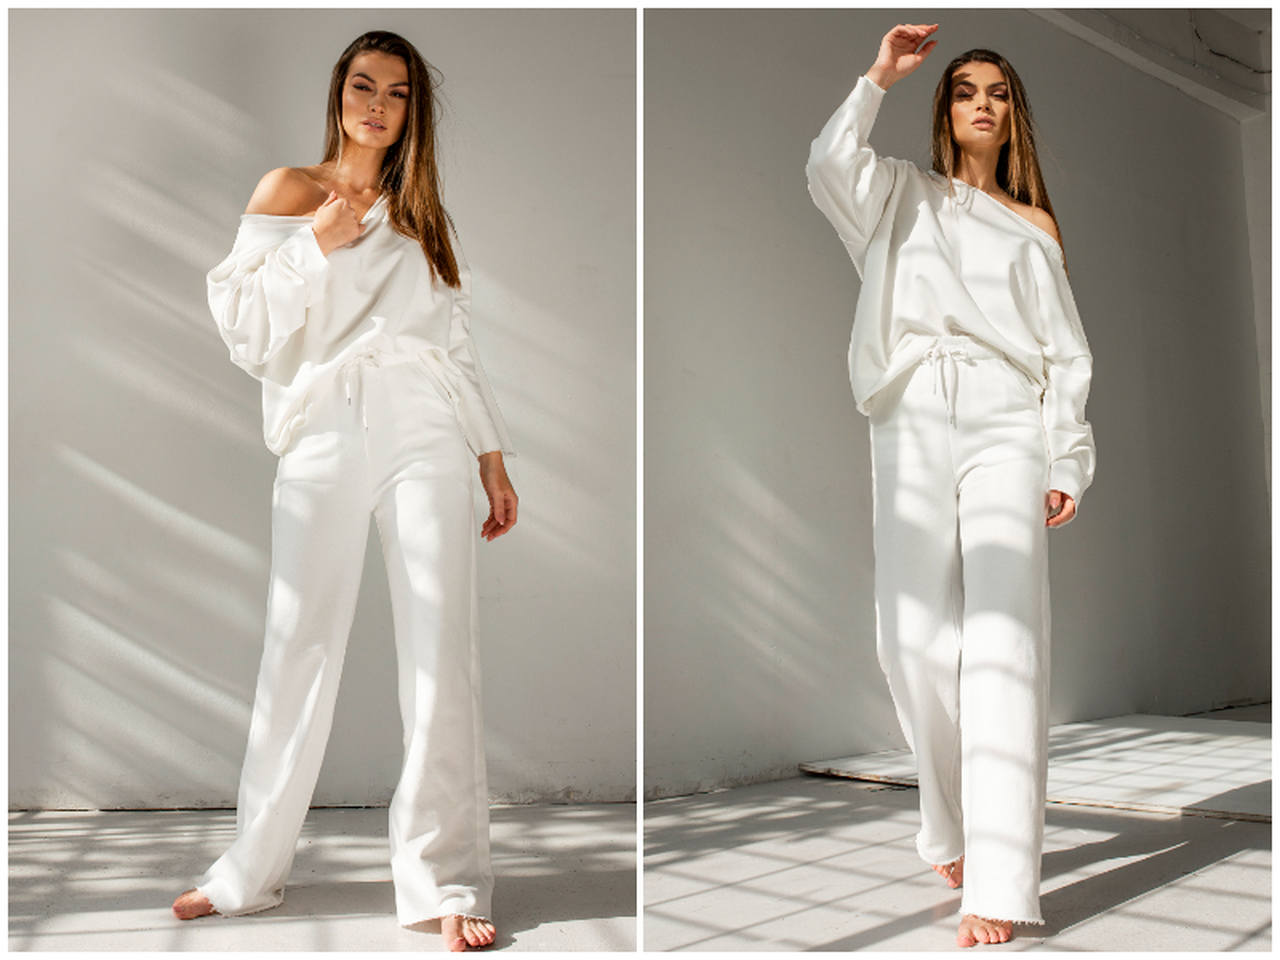 Cotton women’s pajamas in wholesale – where to find the best models?